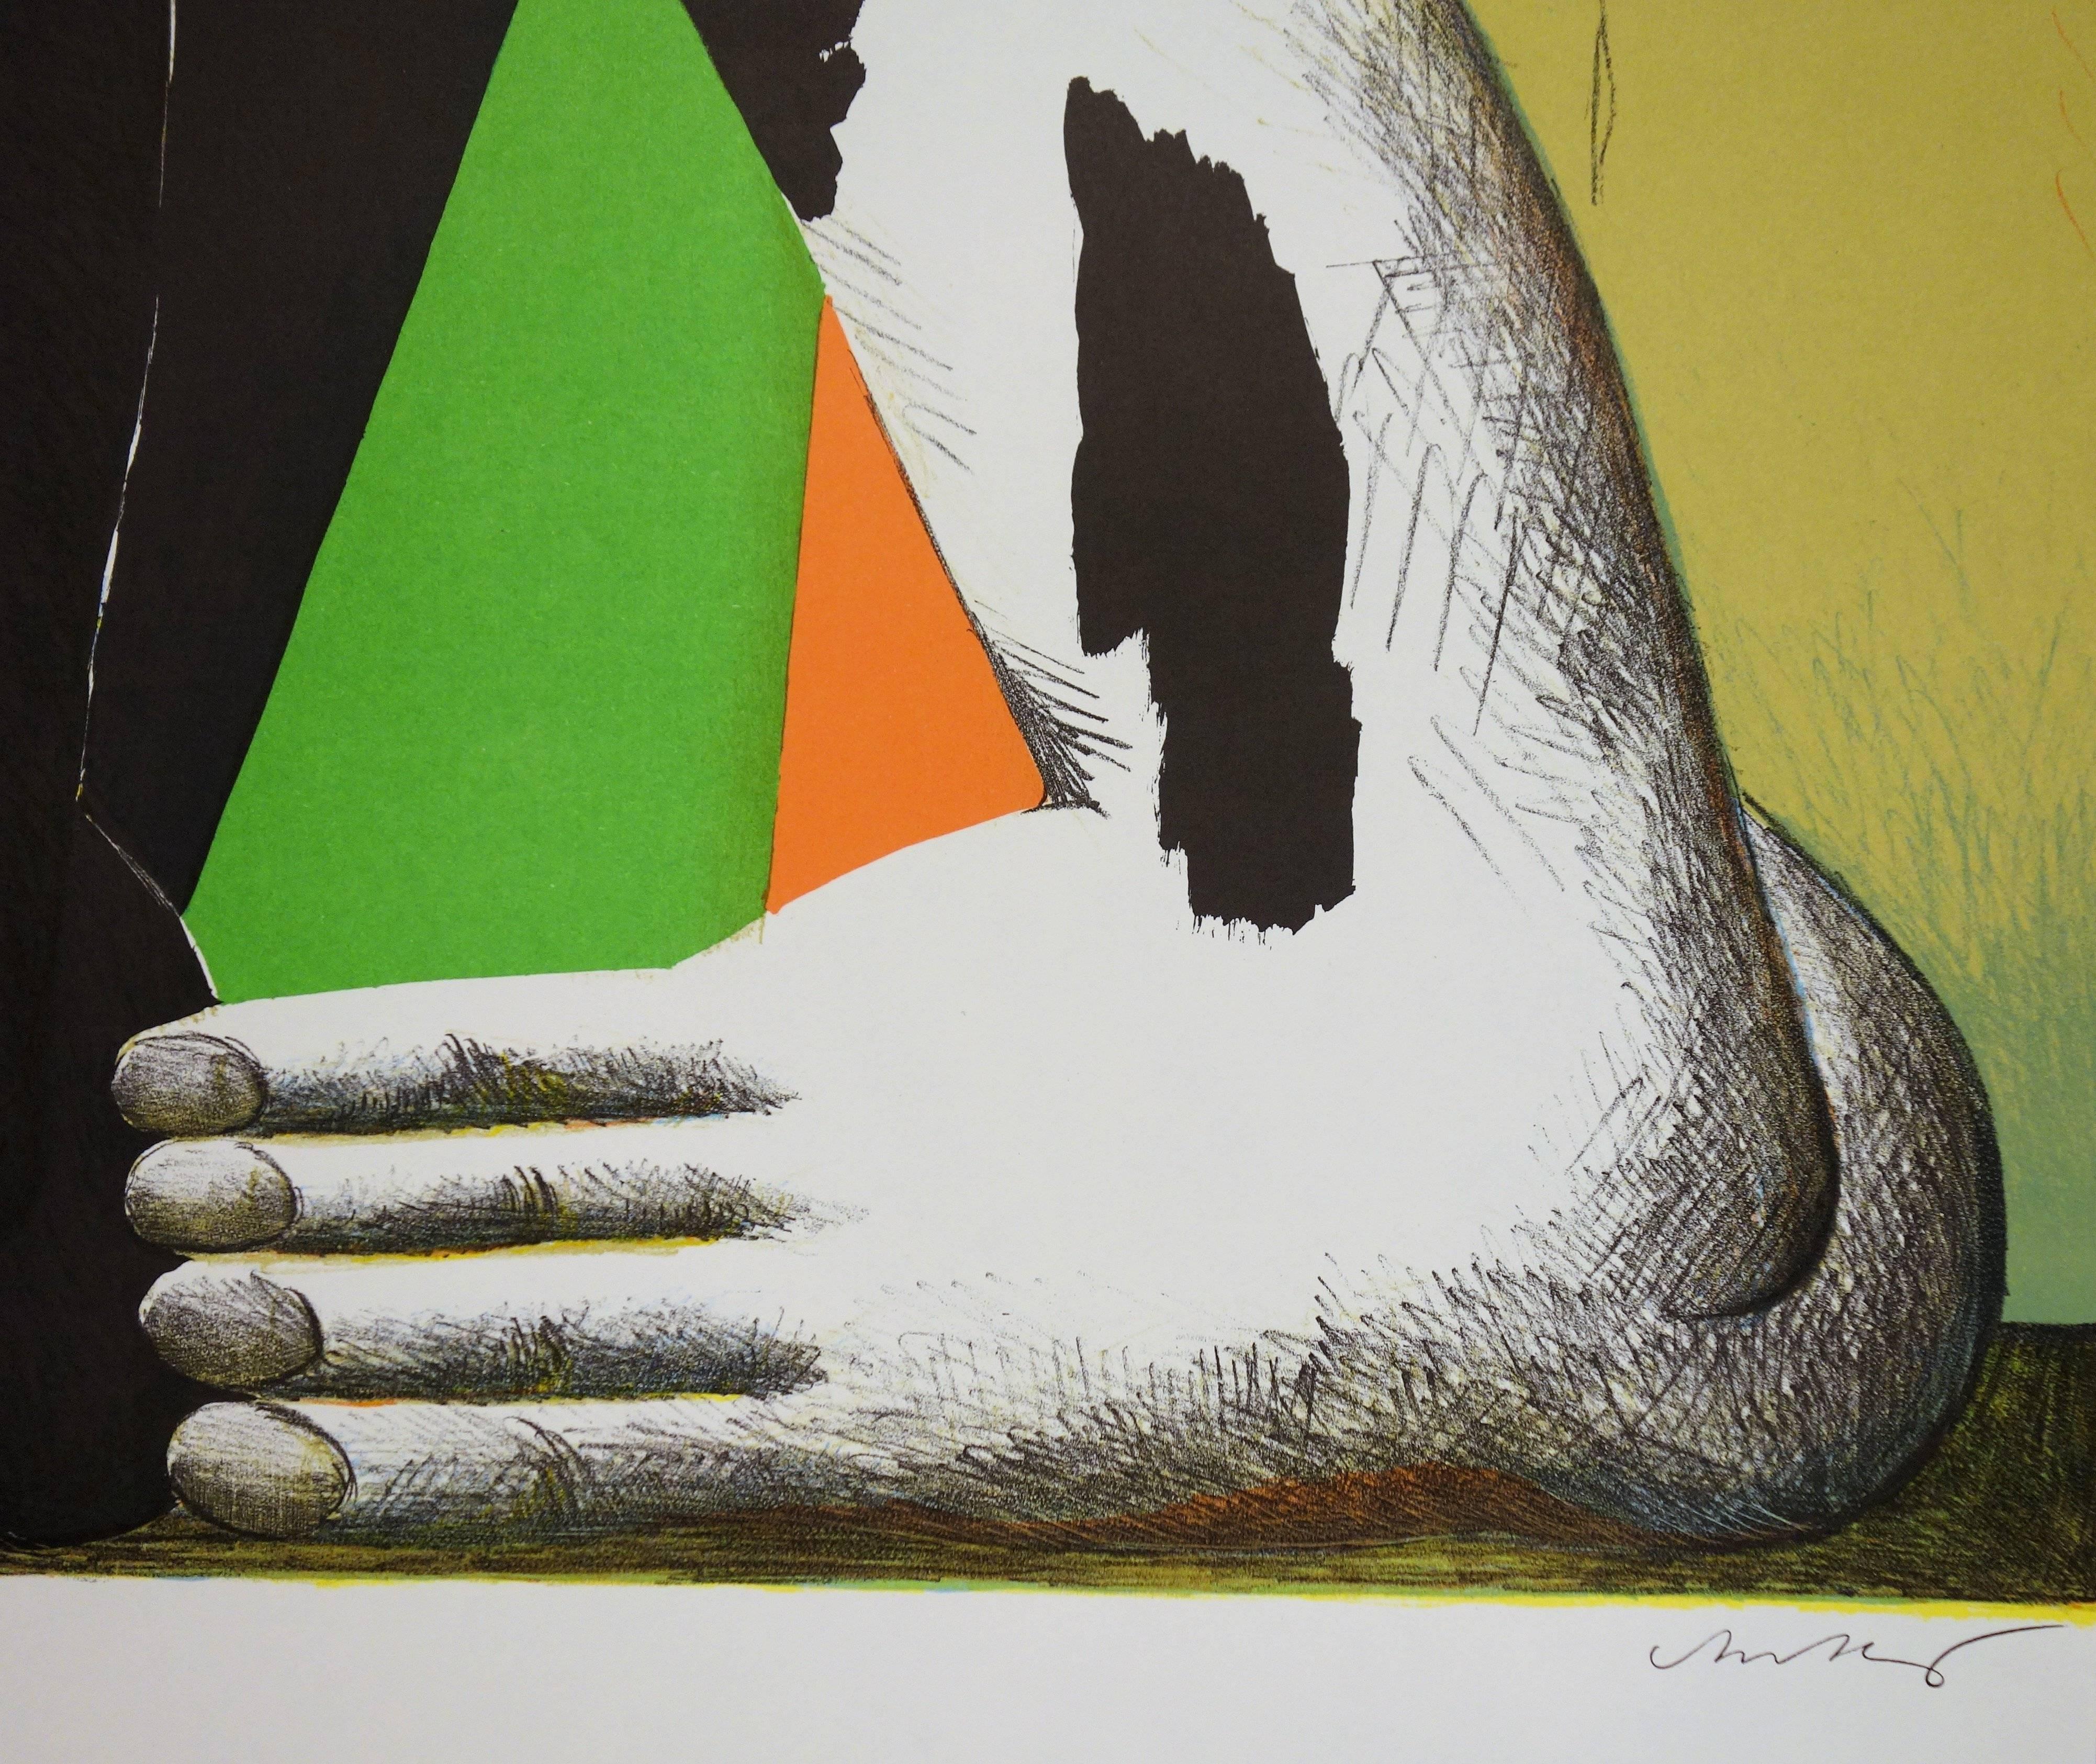 Sport : At the Foot of the Podium - Lithograph (Olympic Games Munich 1972) - Print by Horst Antes